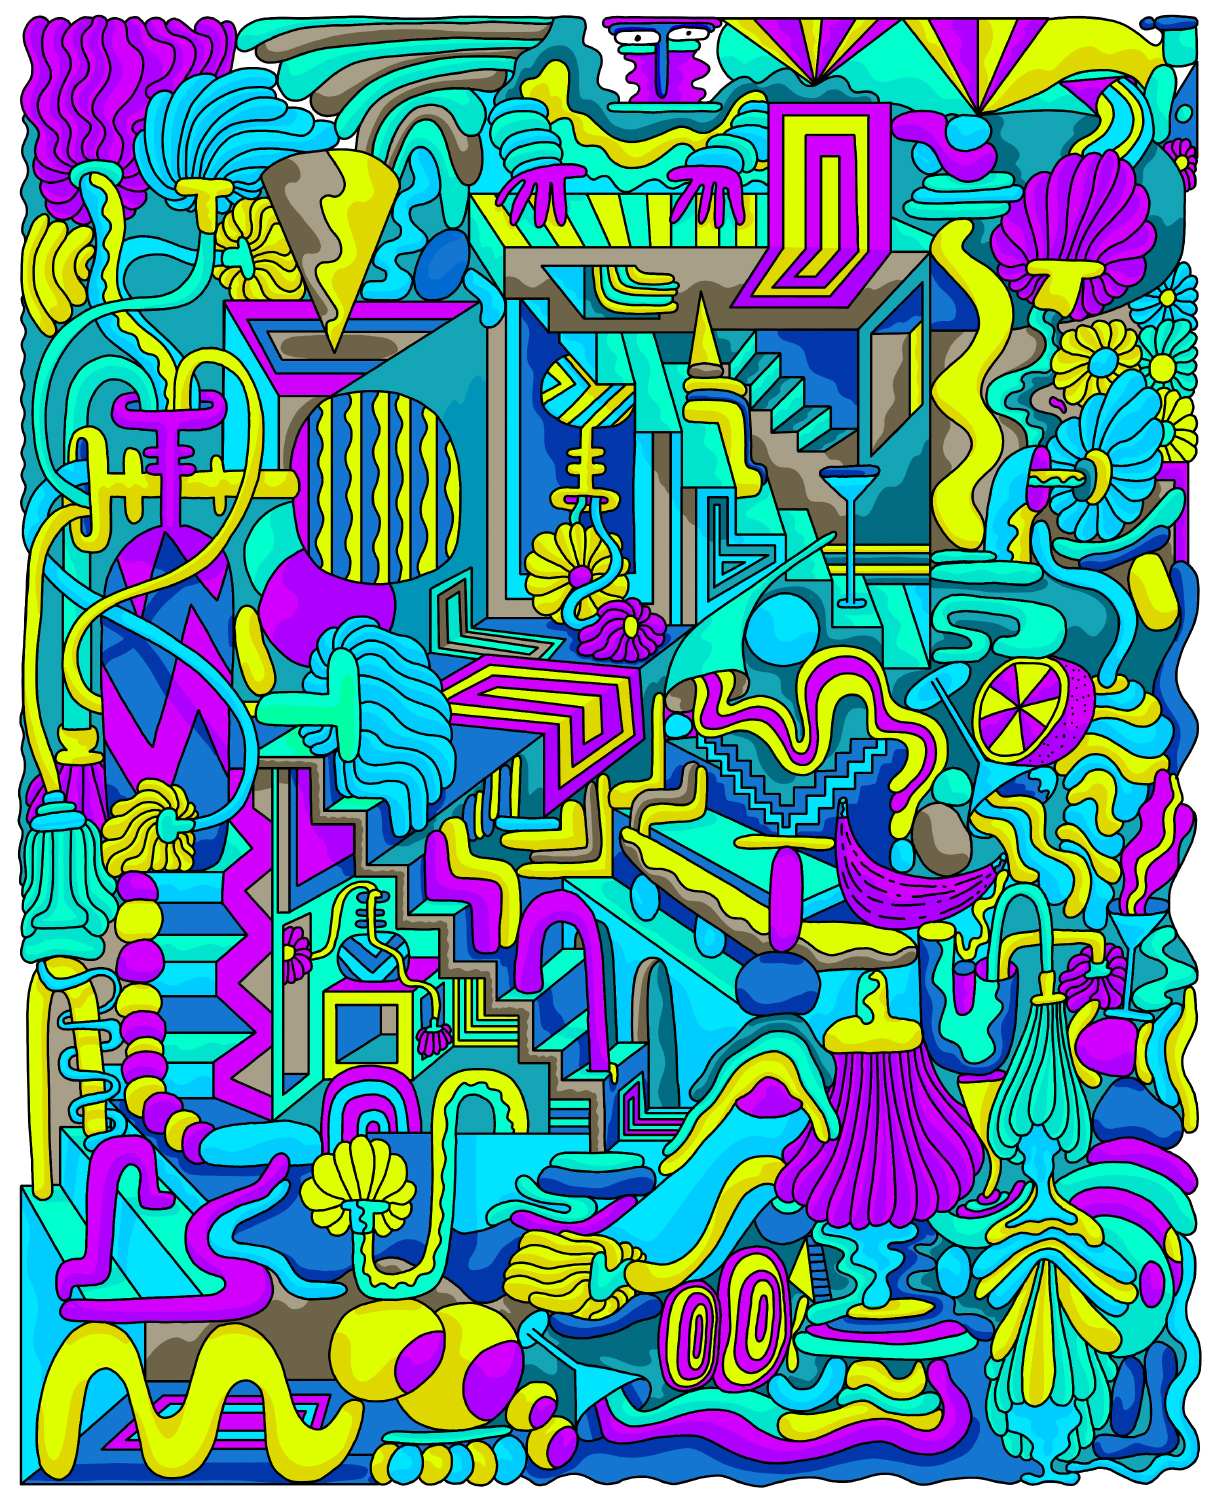 Graphic illustration by Mike Perry